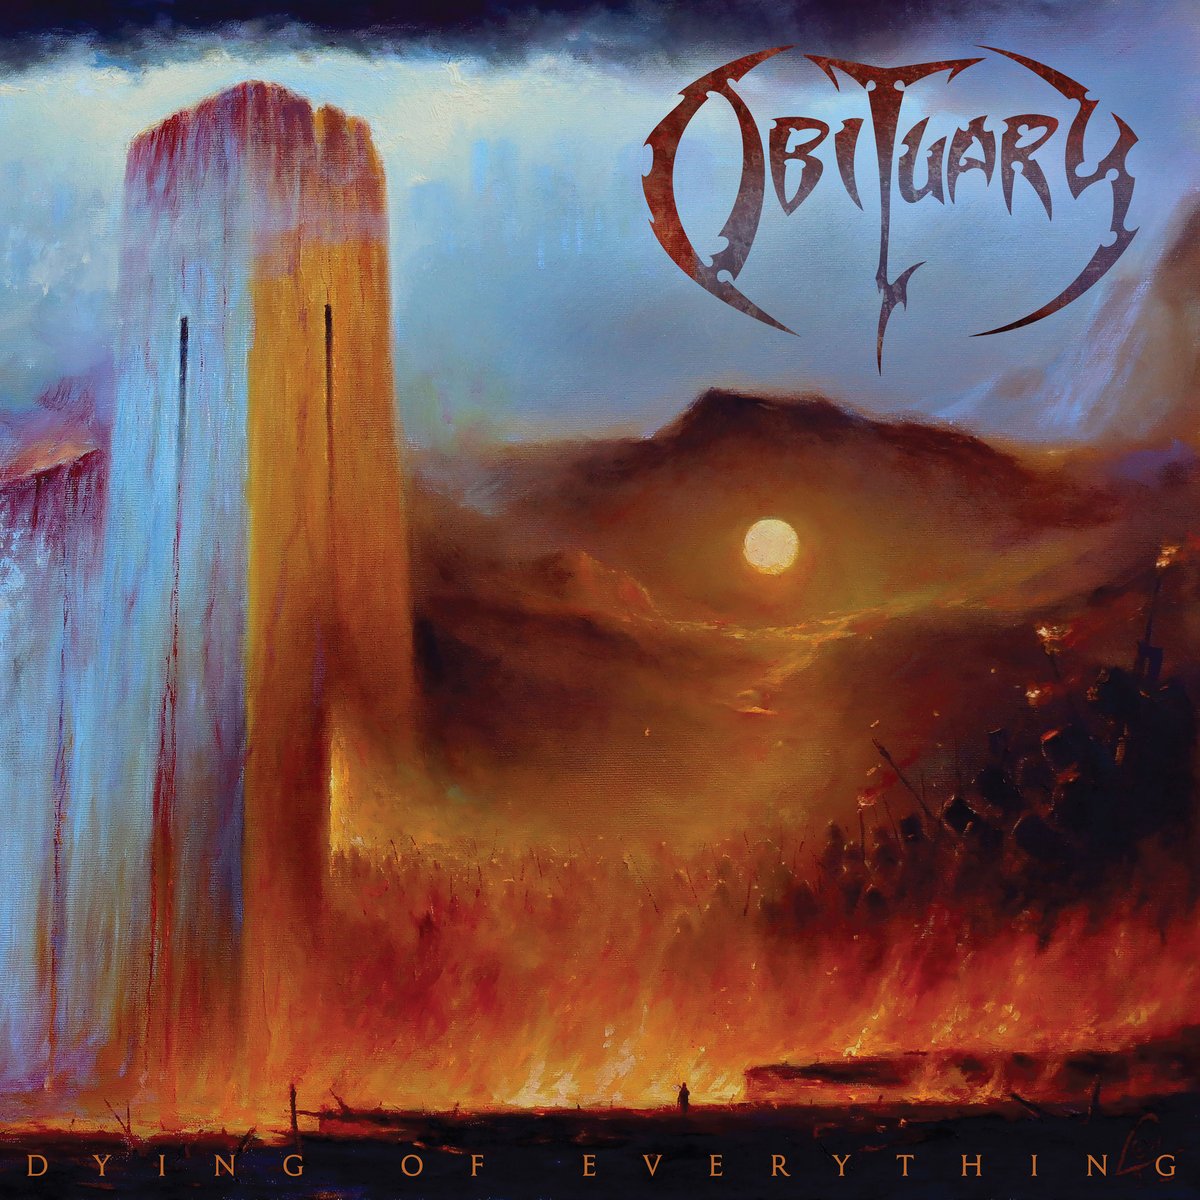 Obituary - Dying of Everything [Dolby Atmos]